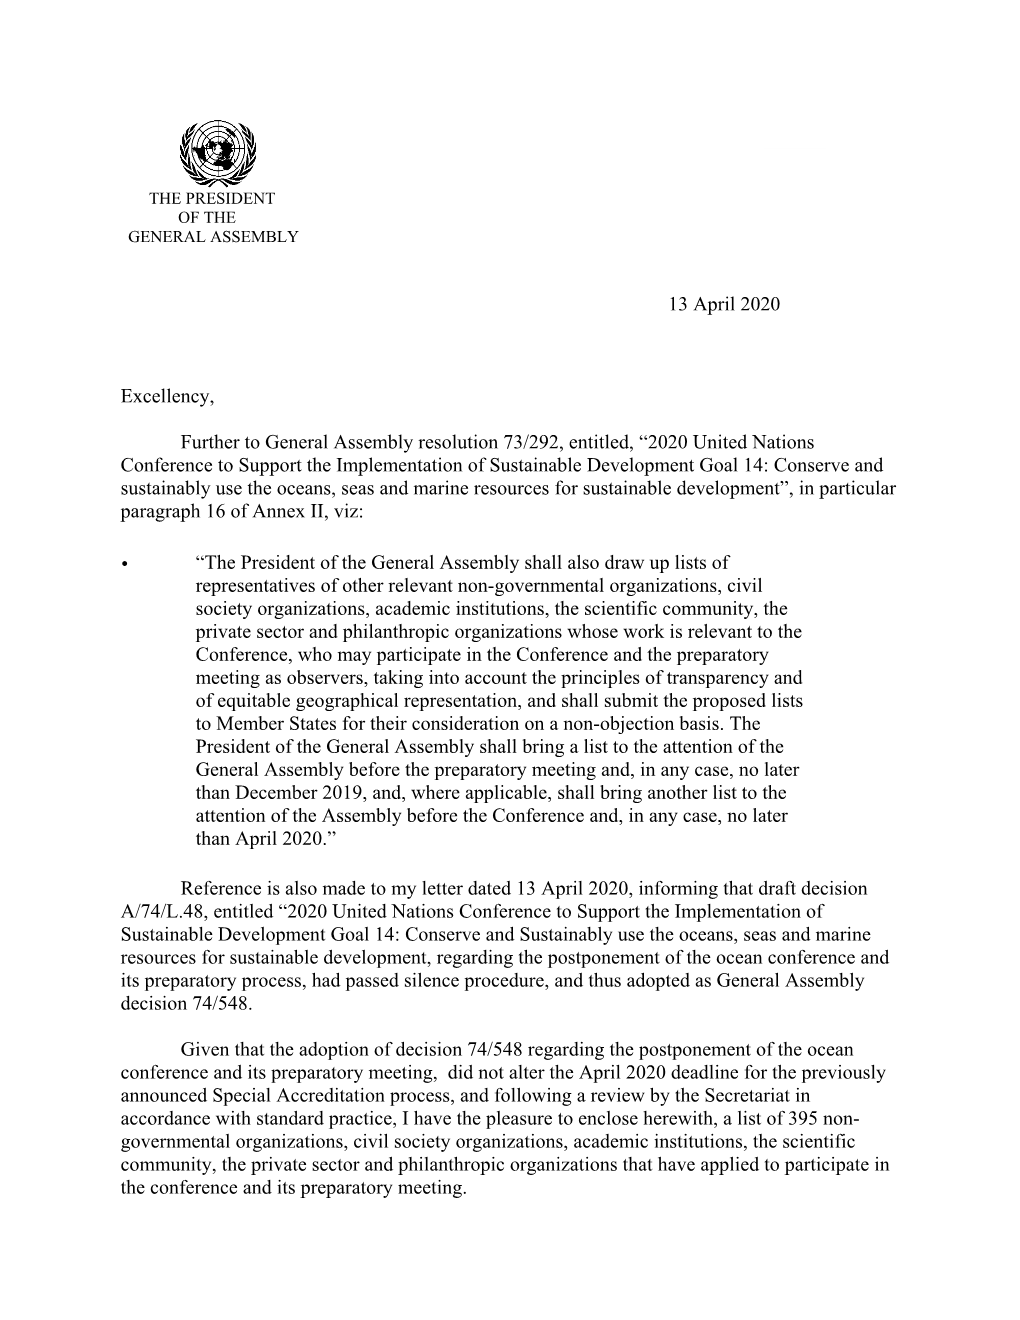 13 April 2020 Excellency, Further to General Assembly Resolution 73/292, Entitled, “2020 United Nations Conference to Support